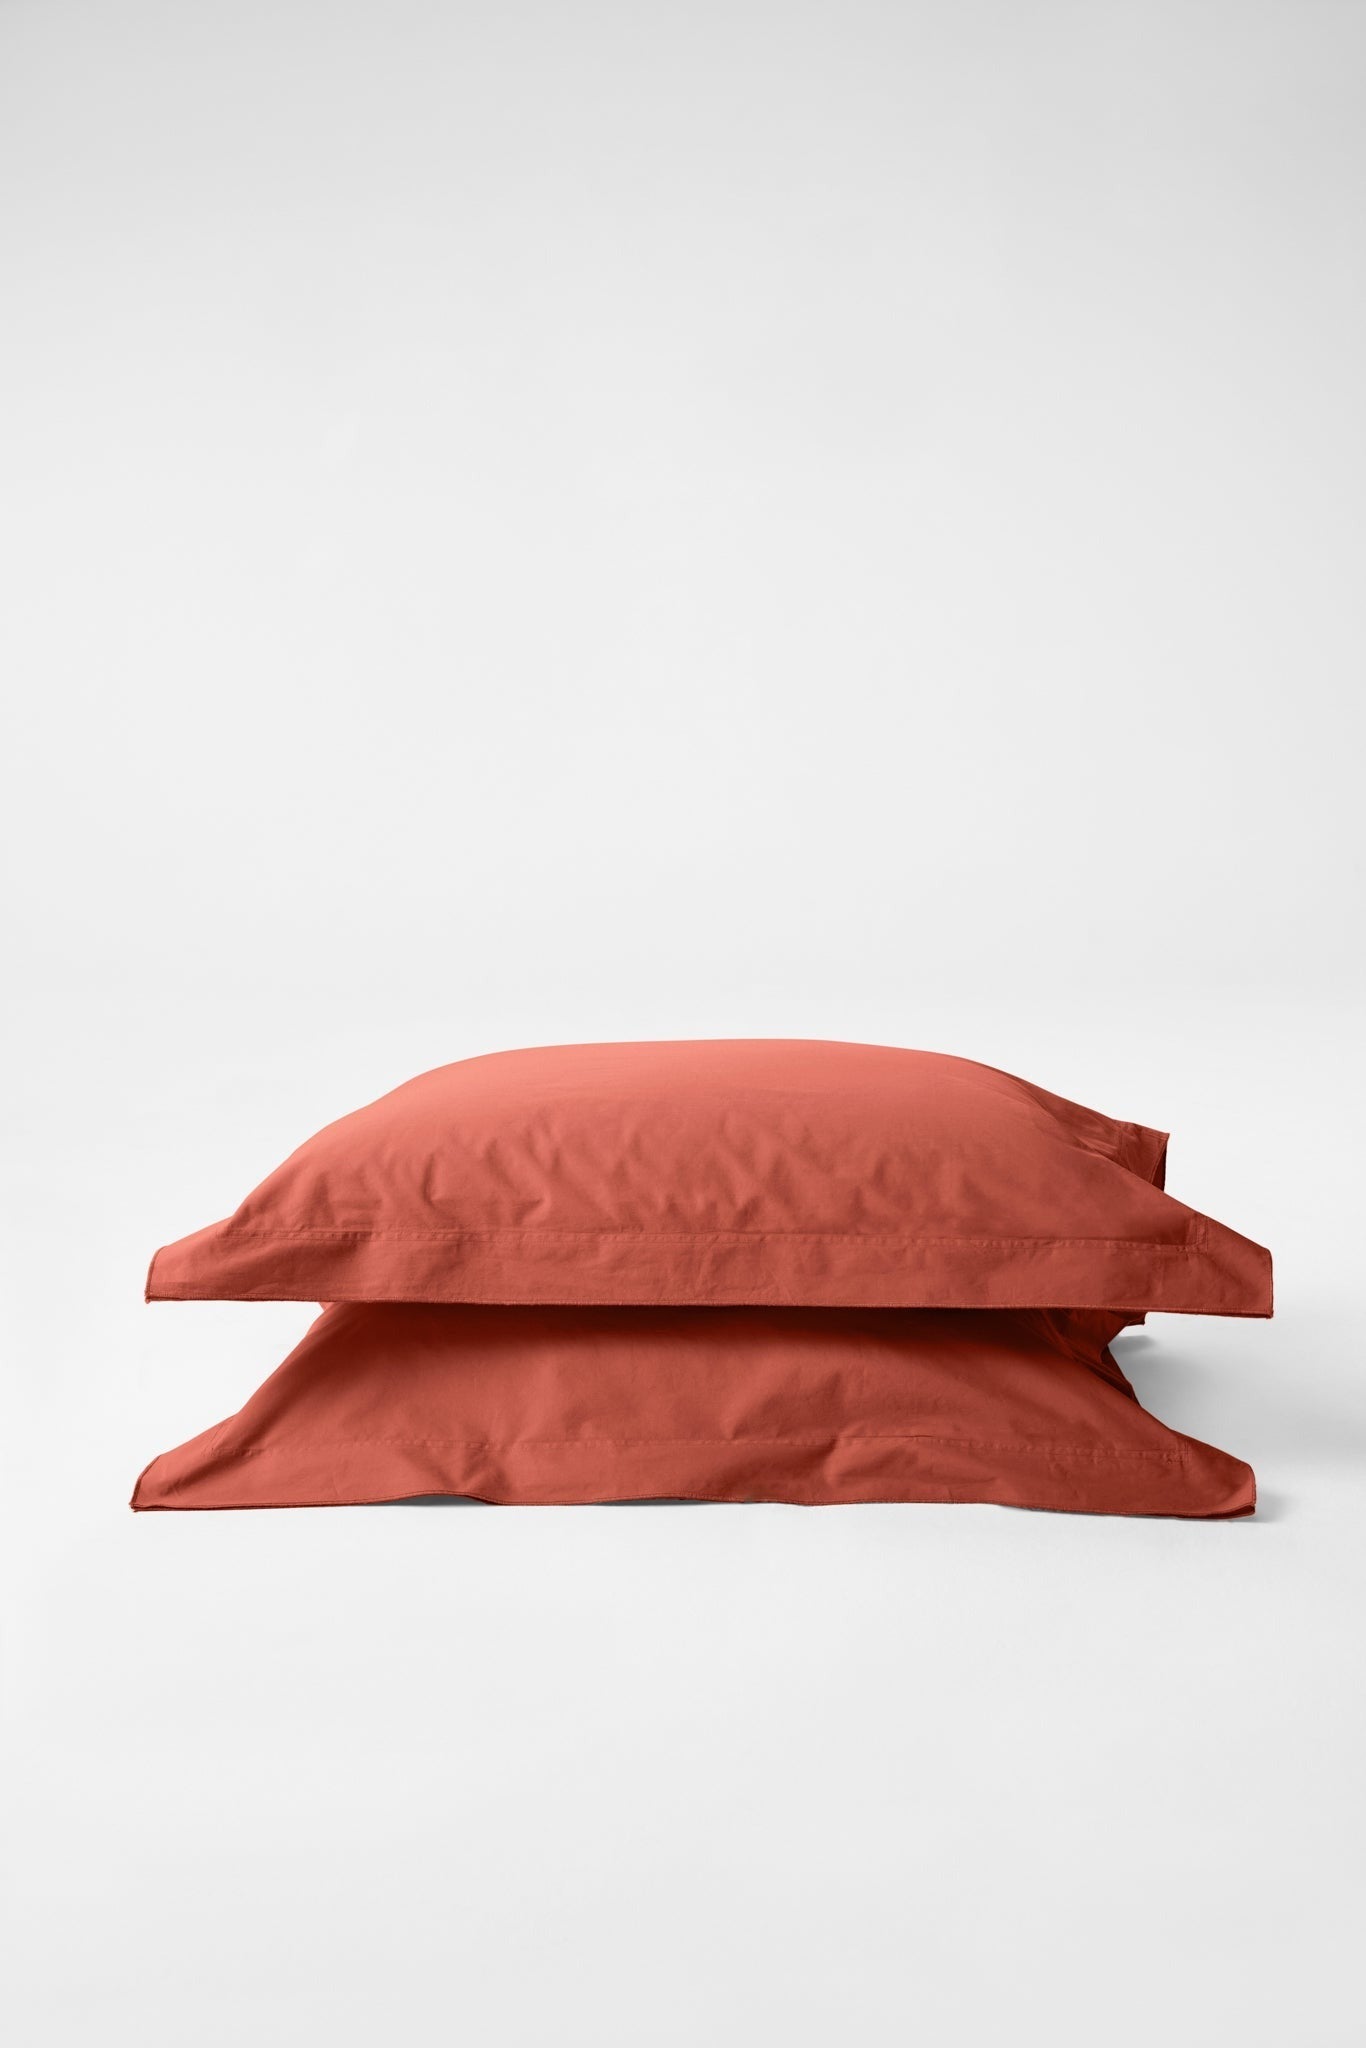 Mono Organic Cotton Percale Pillow Pair - Ochre Red Pillows in King Pillow